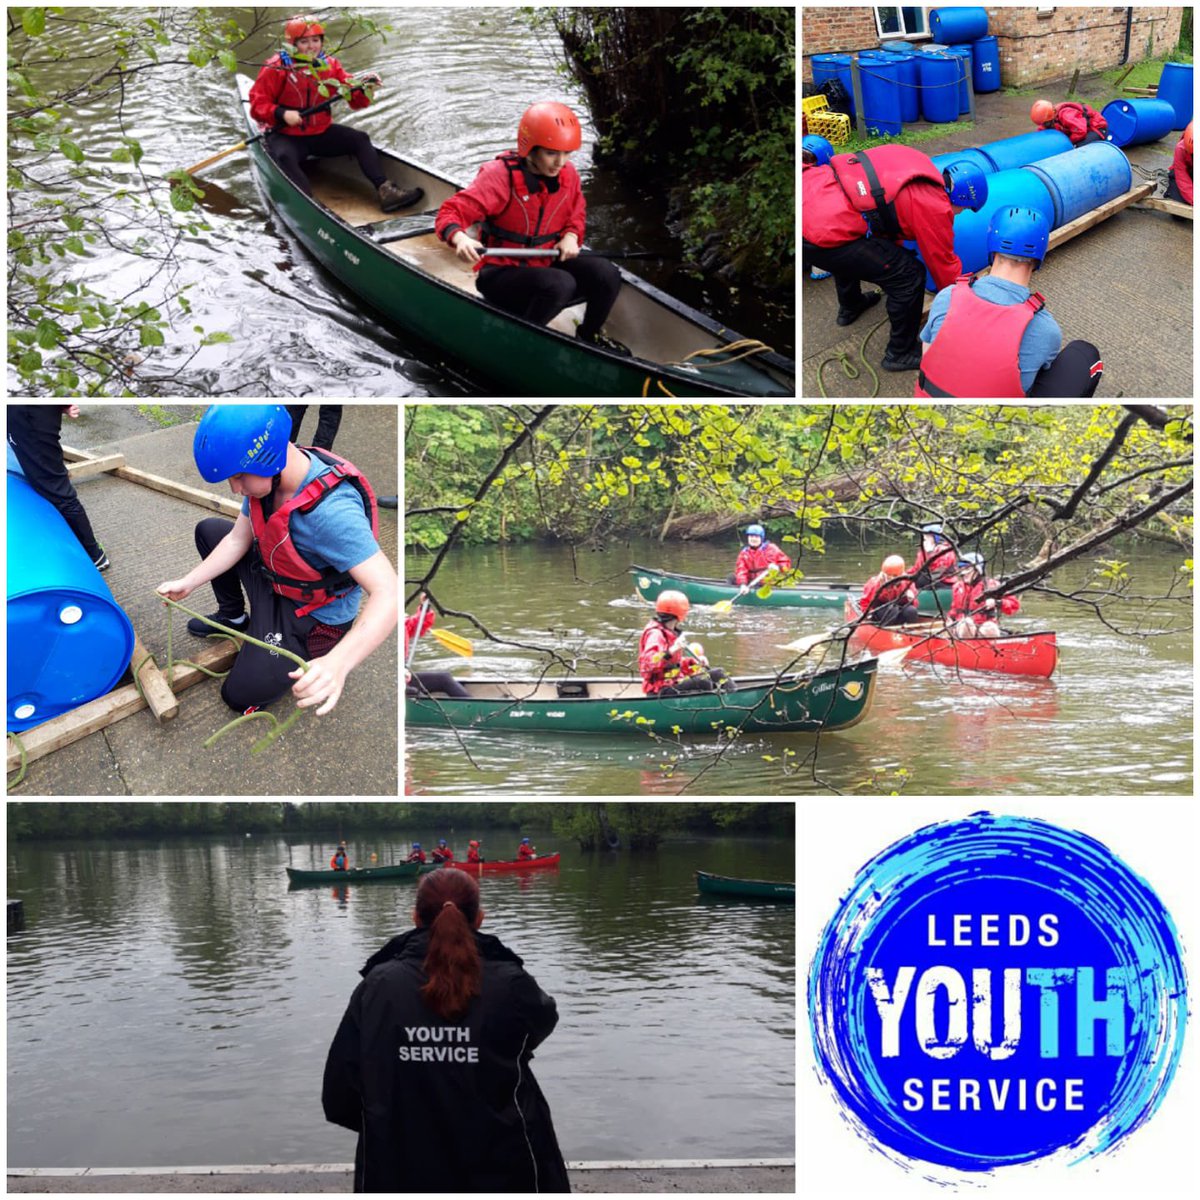 Here We Go 

First session of the #LeedsYouthService @NCS programme happening right now.

The focus of todays session is #teambuilding & #confidence 

#Youngpeople #engaging in some
great activities @CarltonLodge1 

#Youthwork